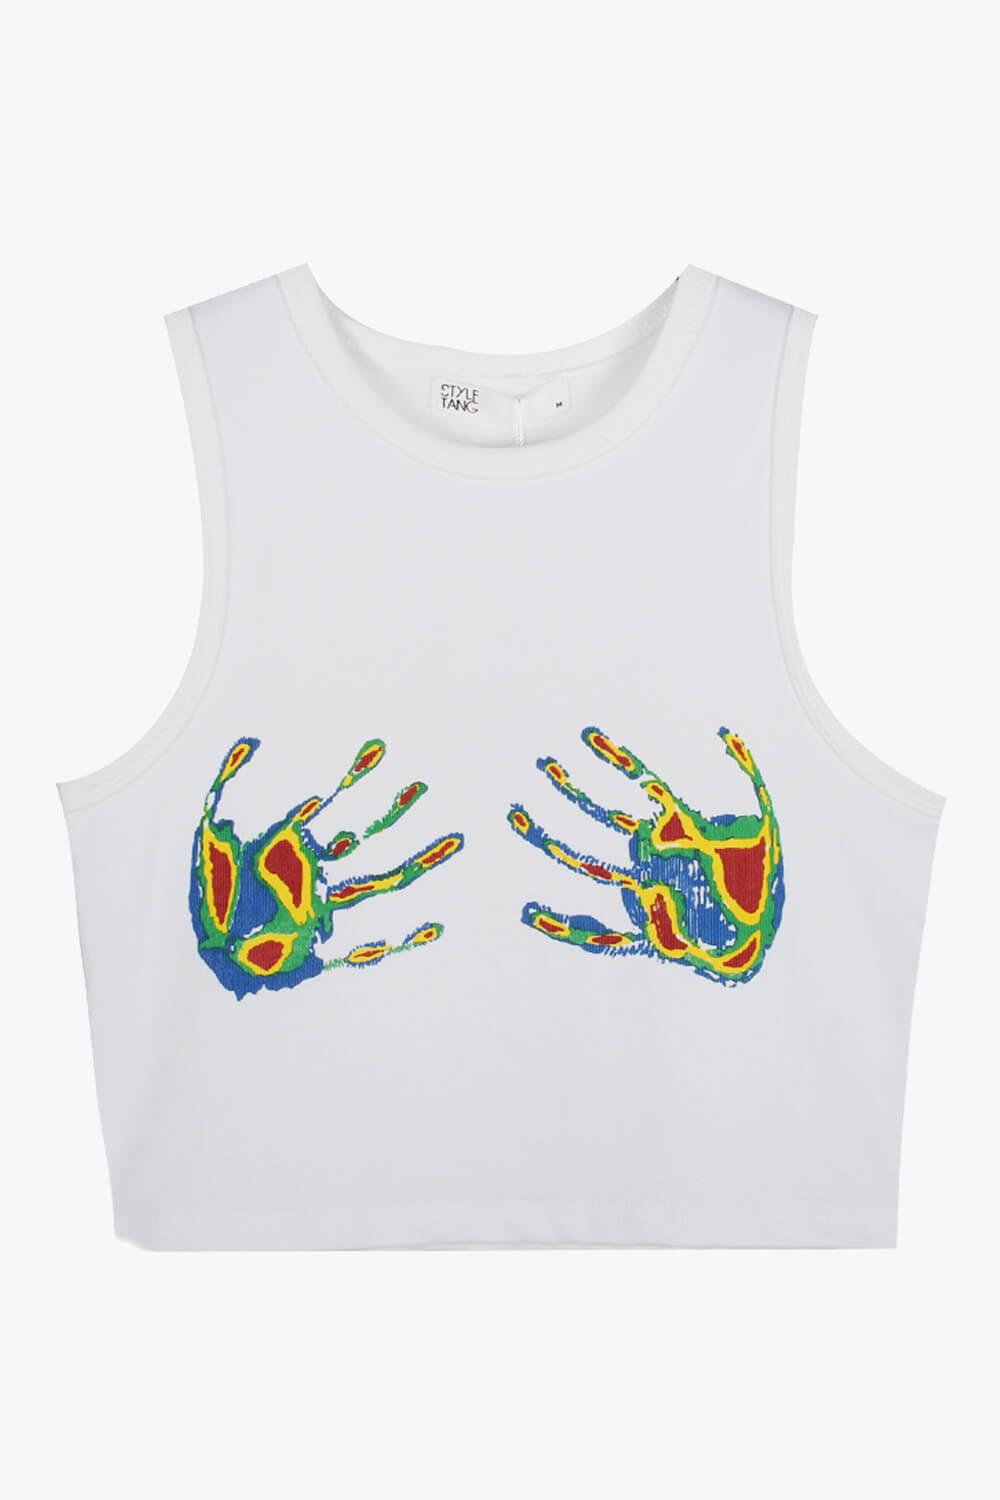 Thermal Hands Aesthetic Crop Top - Aesthetic Clothes Shop S / White